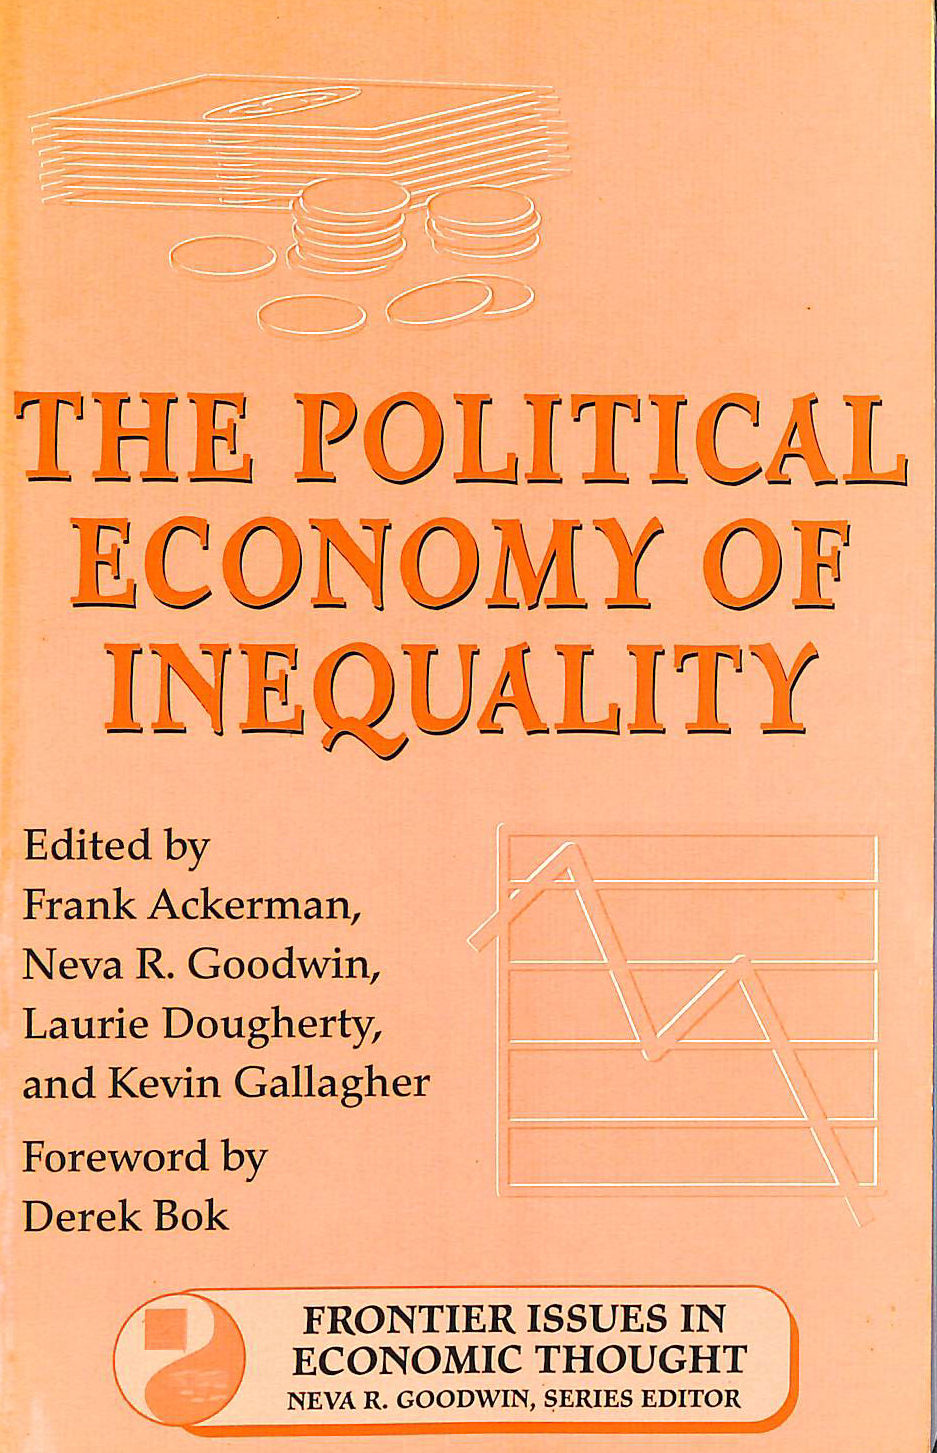 FRANK ACKERMAN, NEVA R. GOODWIN ET AL - The Political Economy of Inequality (Frontier Issues in Economic Thought)